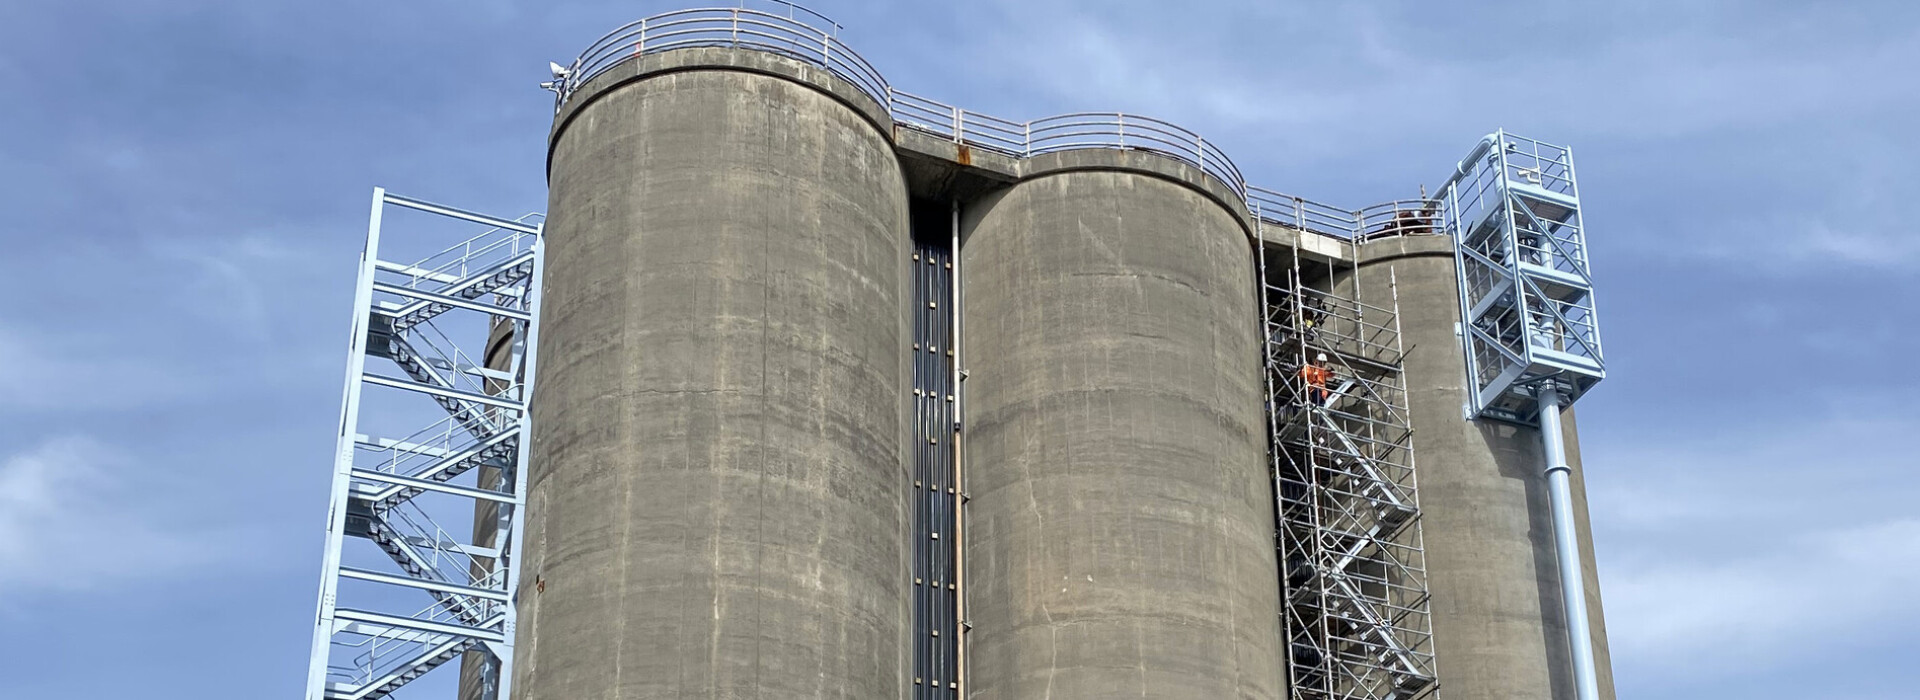 Silo 6 Emergency Cladding Replacement and Upgrades 